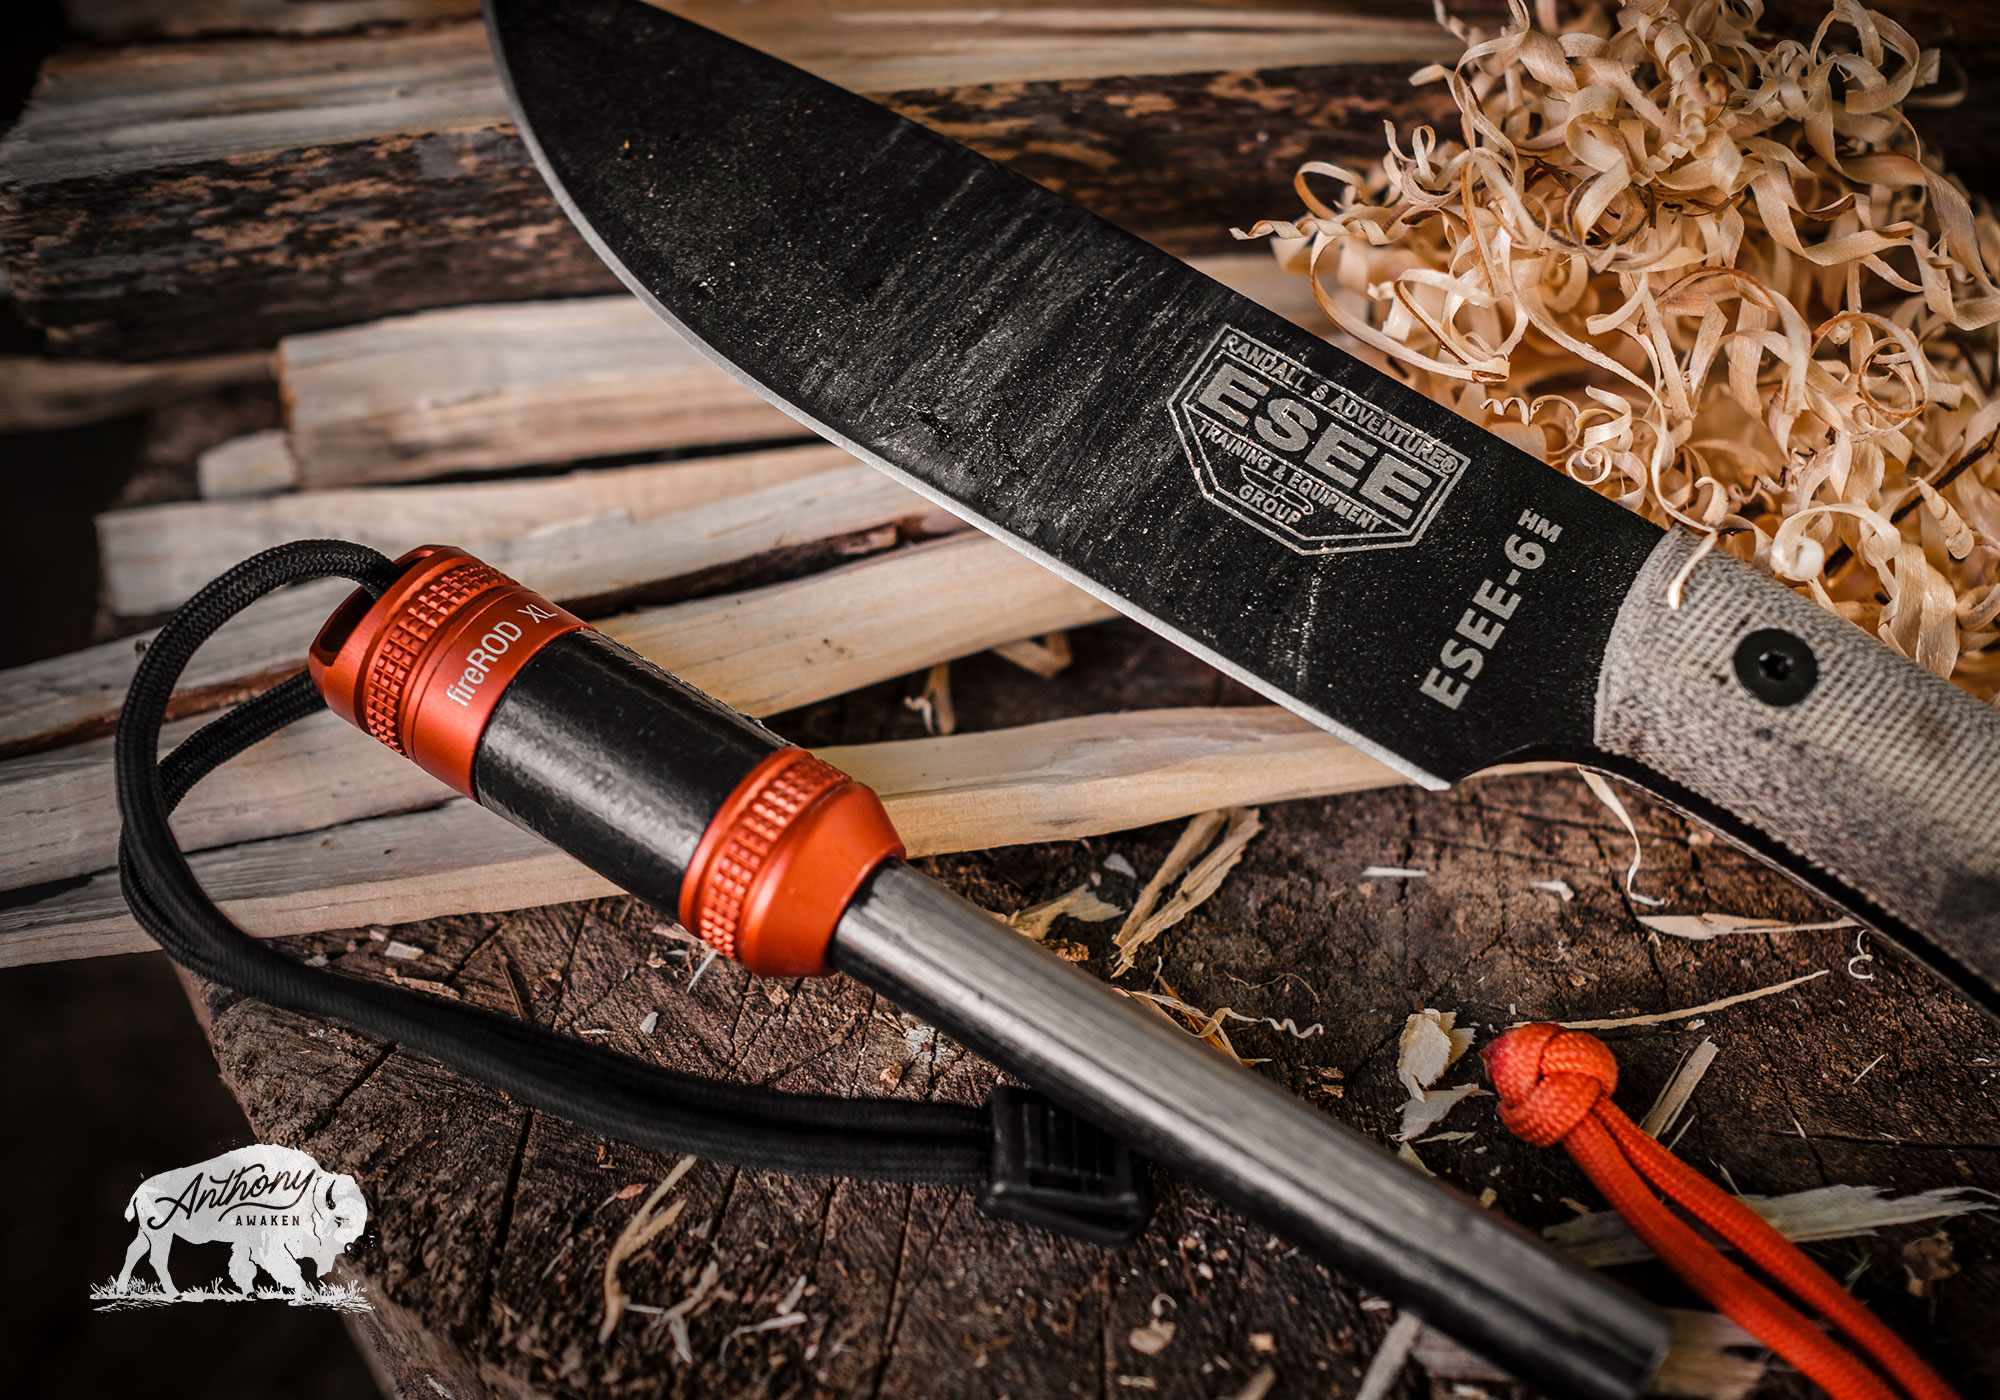 REVIEW: ESEE KNIVES' HUNTING TACTICAL DUO - Knives Illustrated